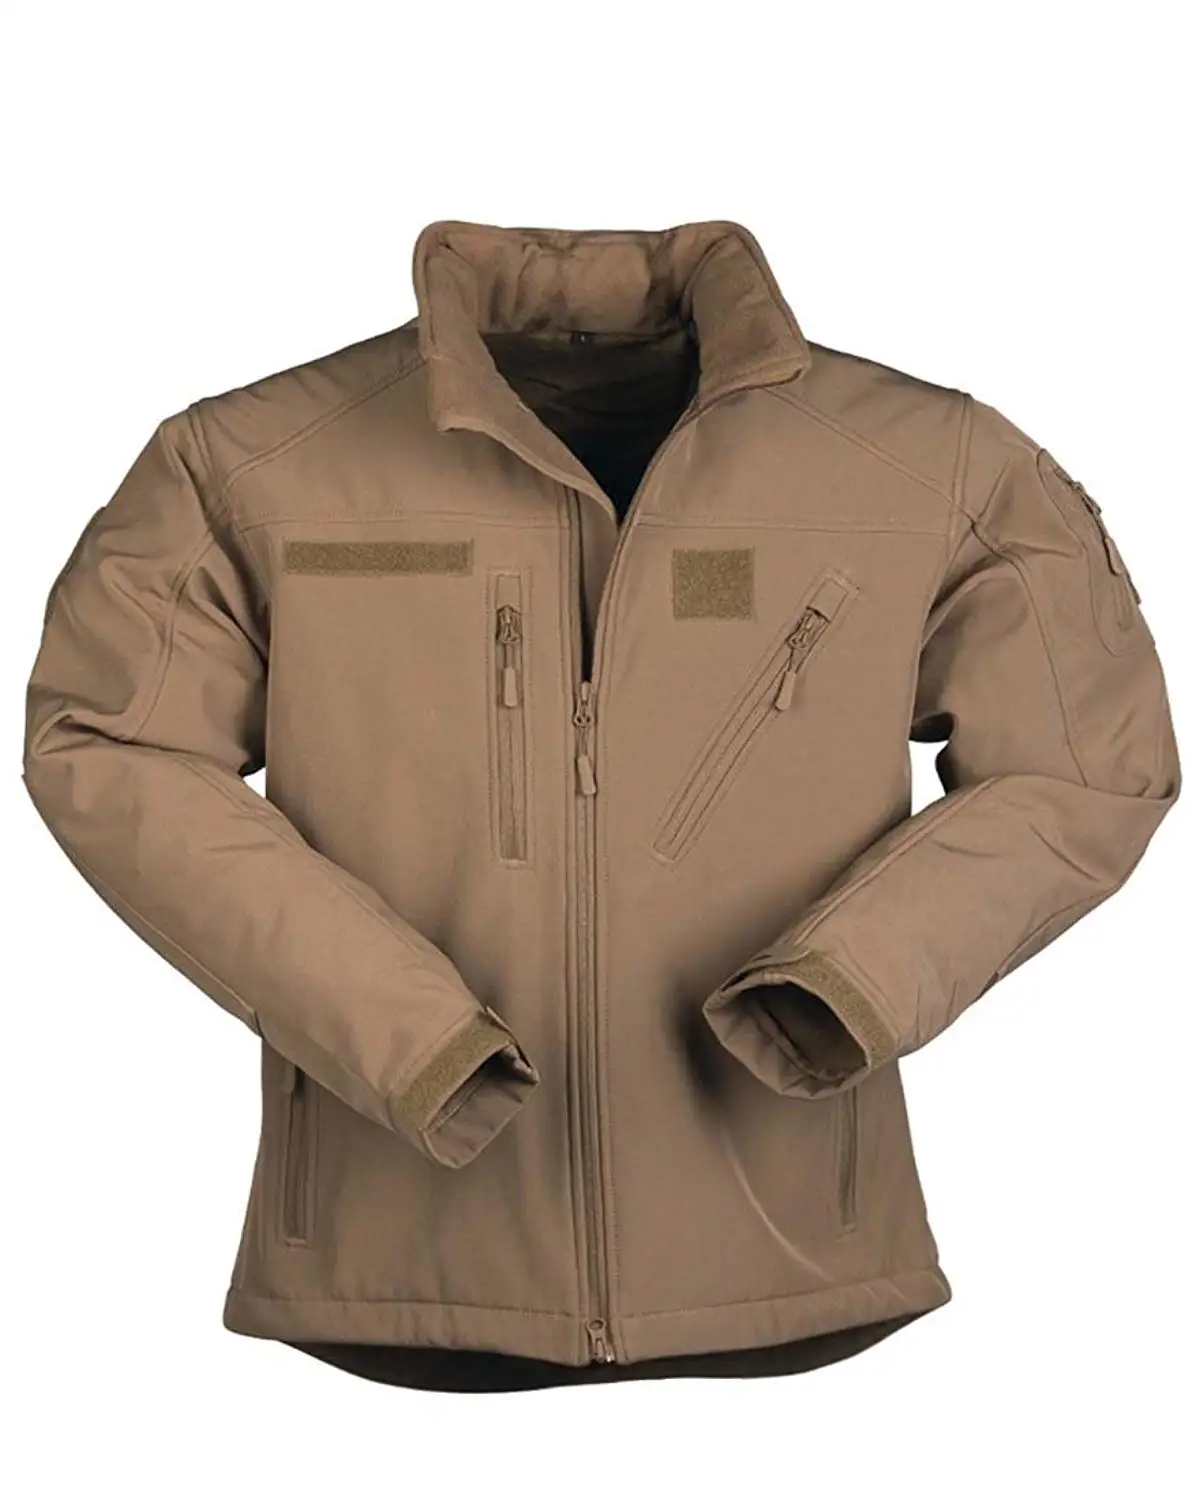 Buy Mil-Tec Soft Shell Jacket Lightweight Coyote in Cheap Price on ...